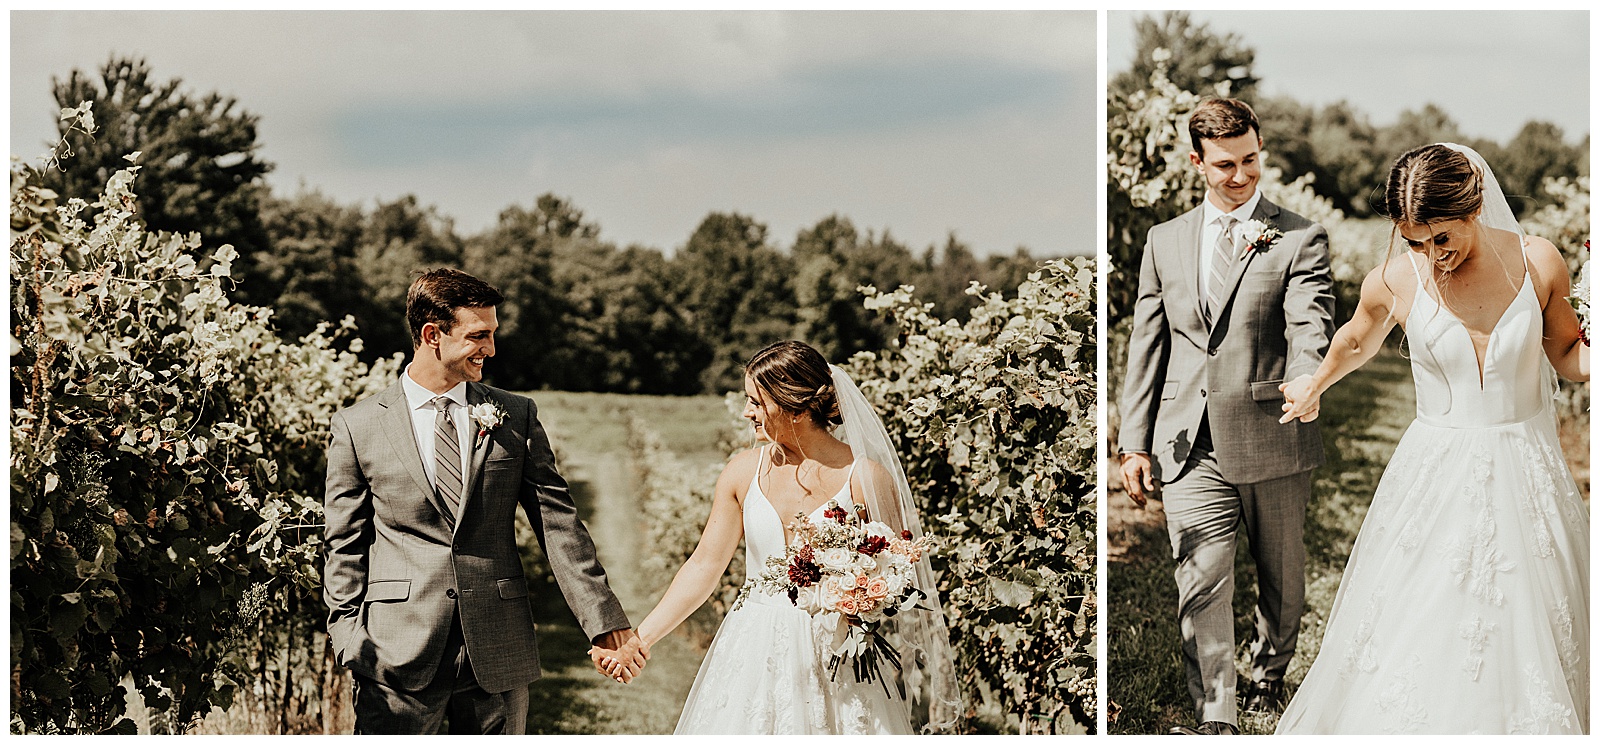 ceremony at an intimate winery wedding in maryland captured by Brey Photo, delaware county photographer